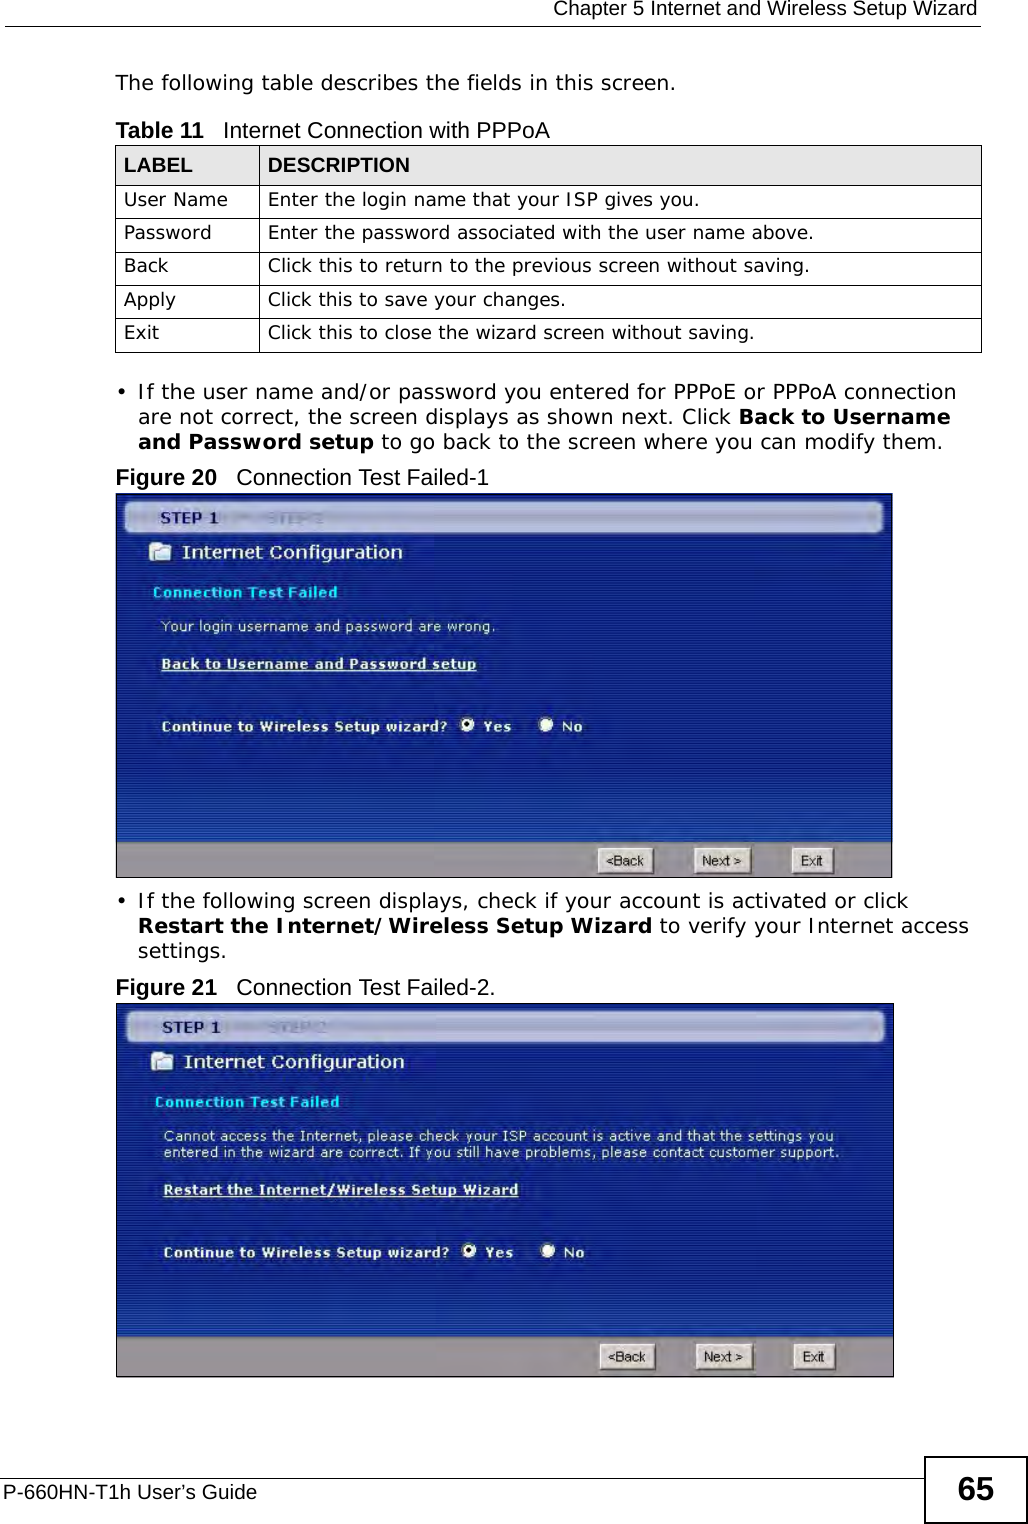  Chapter 5 Internet and Wireless Setup WizardP-660HN-T1h User’s Guide 65The following table describes the fields in this screen.• If the user name and/or password you entered for PPPoE or PPPoA connection are not correct, the screen displays as shown next. Click Back to Username and Password setup to go back to the screen where you can modify them.Figure 20   Connection Test Failed-1• If the following screen displays, check if your account is activated or click Restart the Internet/Wireless Setup Wizard to verify your Internet access settings. Figure 21   Connection Test Failed-2.Table 11   Internet Connection with PPPoALABEL DESCRIPTIONUser Name Enter the login name that your ISP gives you. Password Enter the password associated with the user name above.Back Click this to return to the previous screen without saving.Apply Click this to save your changes.Exit Click this to close the wizard screen without saving.